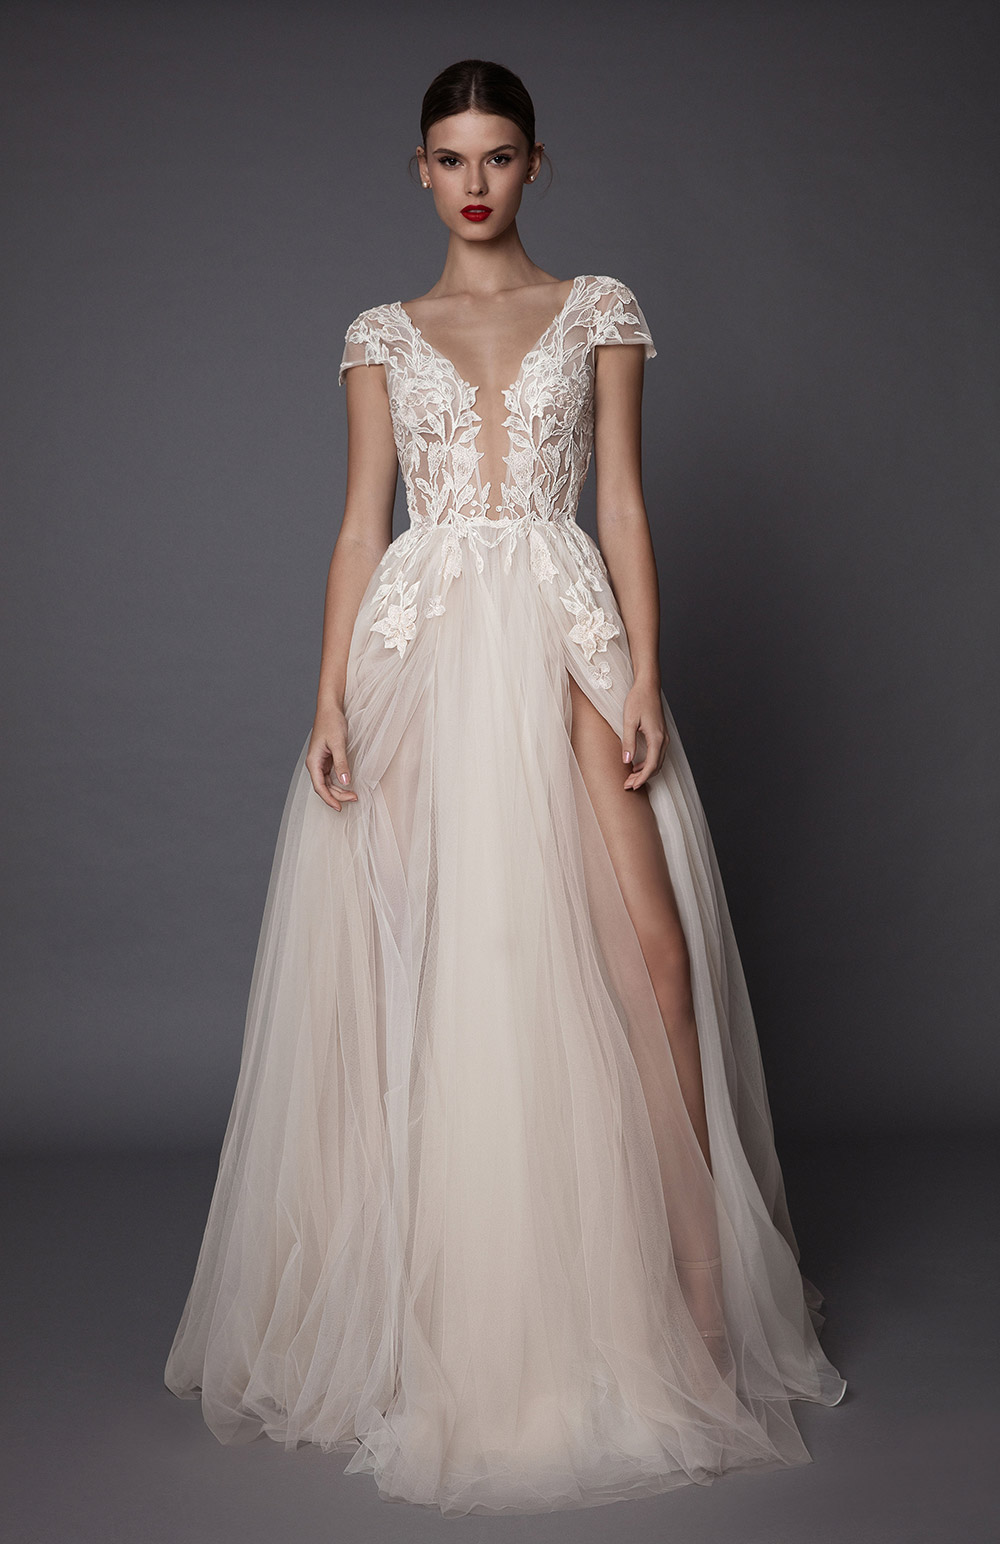 Antonia - Muse by Berta Fall 2017 Collection. www.theweddingnotebook.com